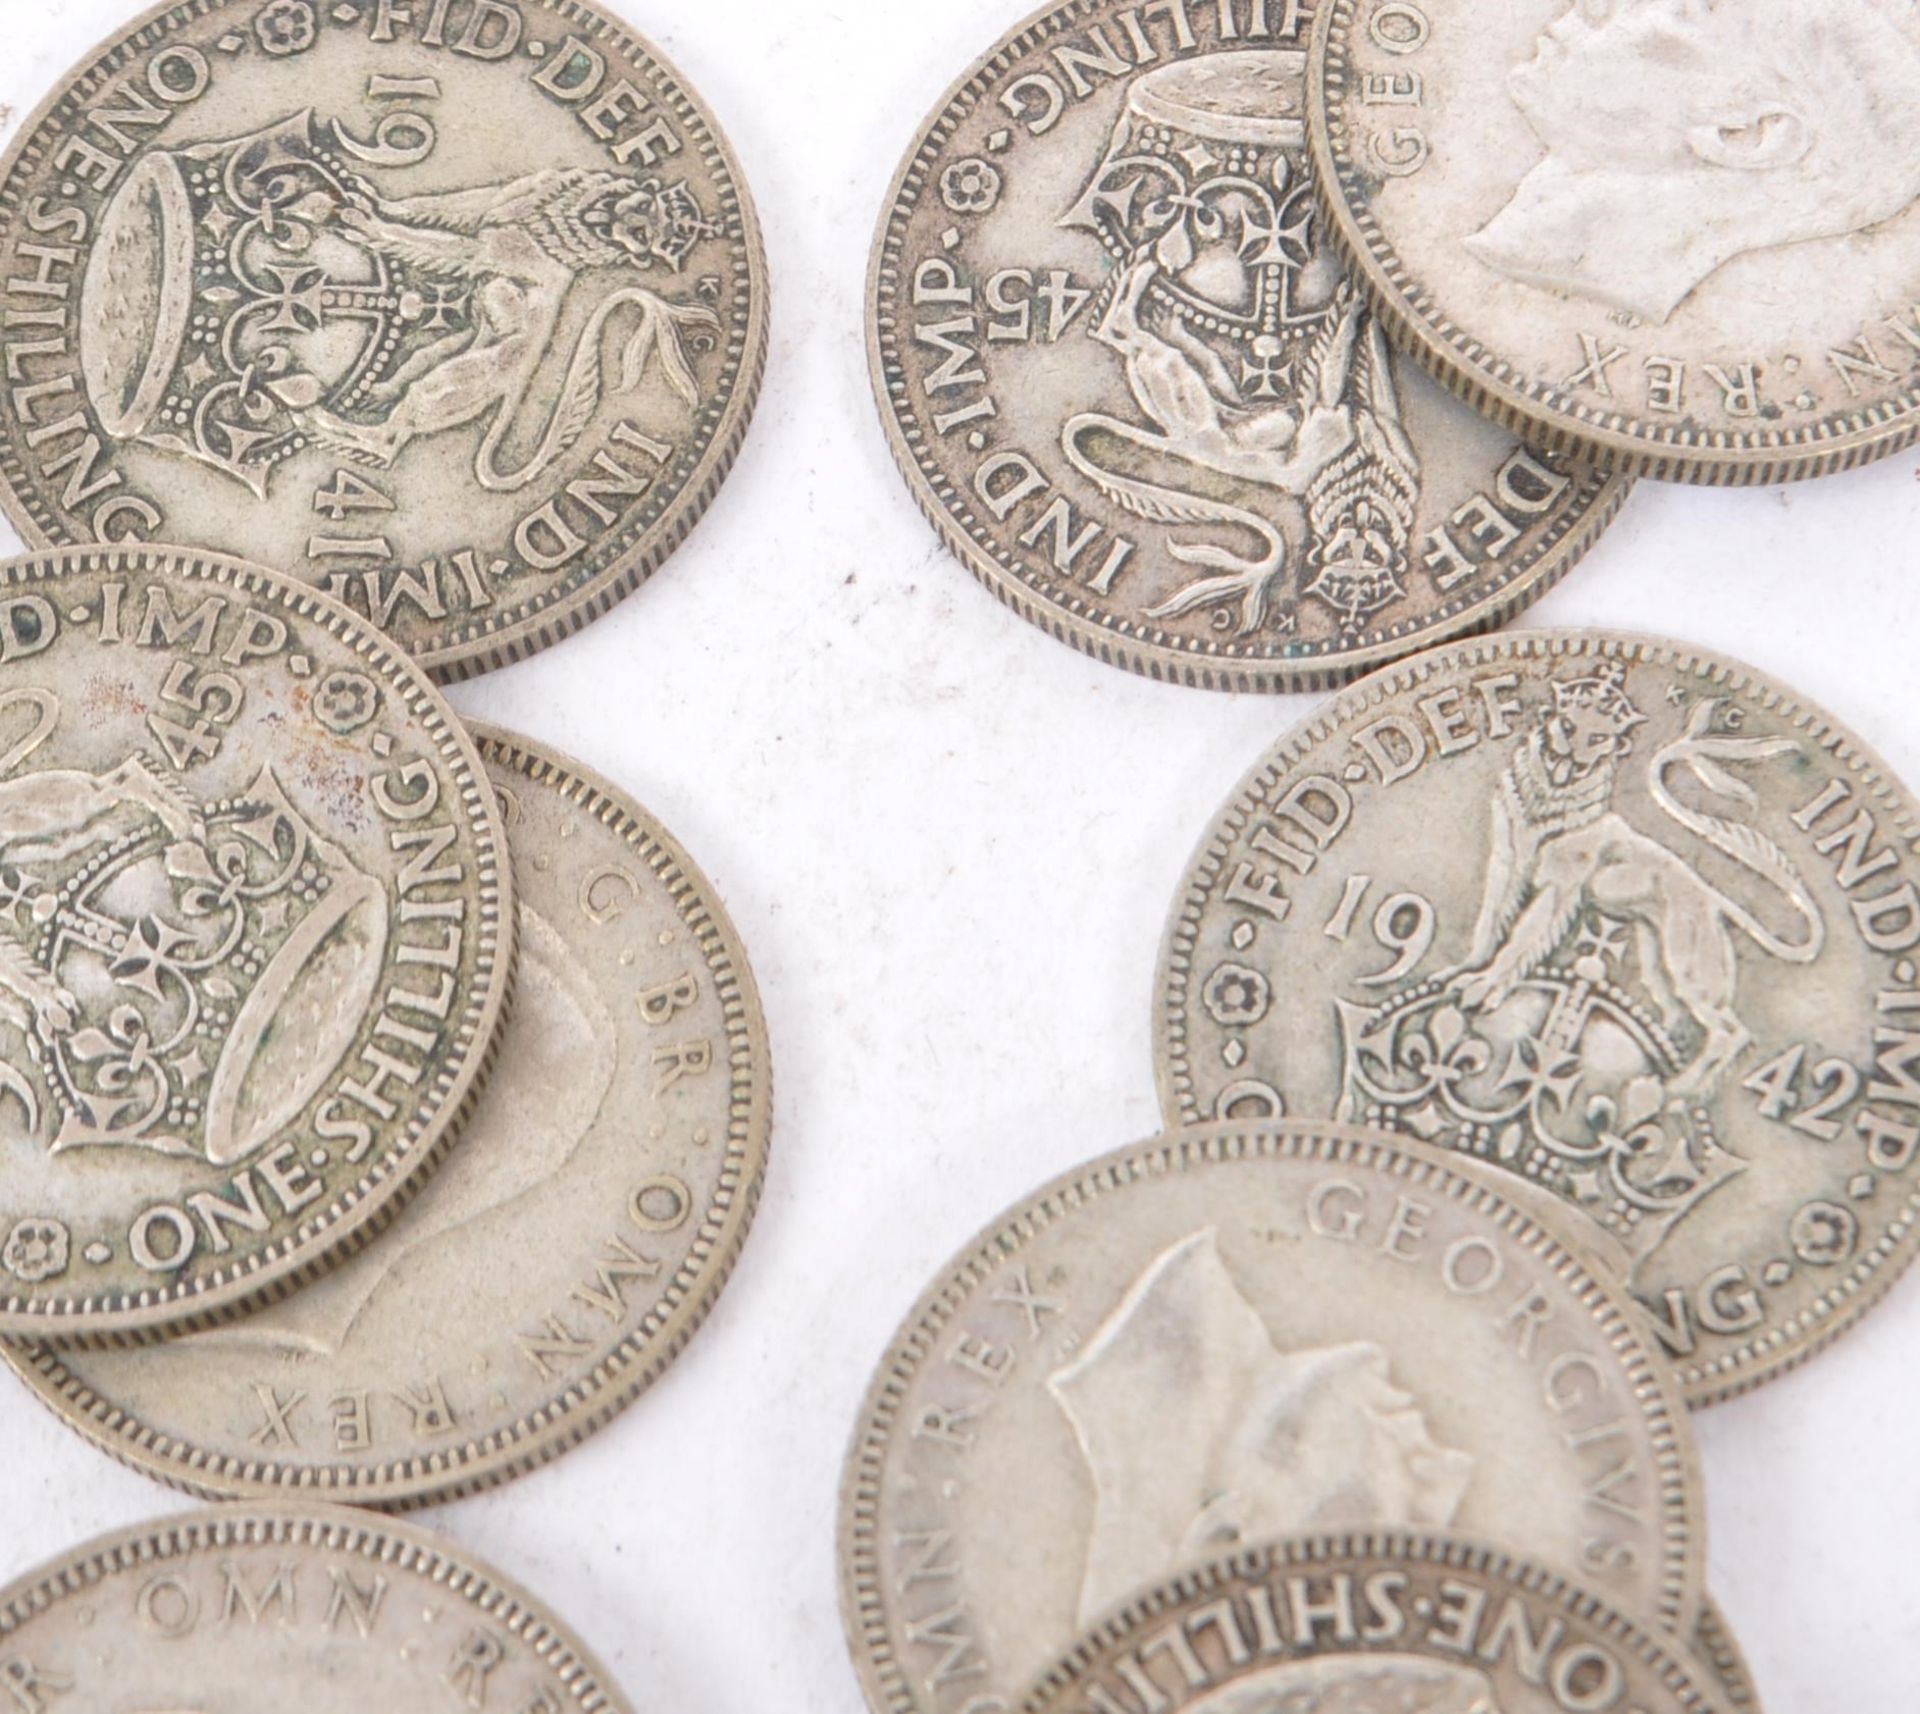 COLLECTION 20TH CENTURY BRITISH SHILLING COINS - Image 5 of 6